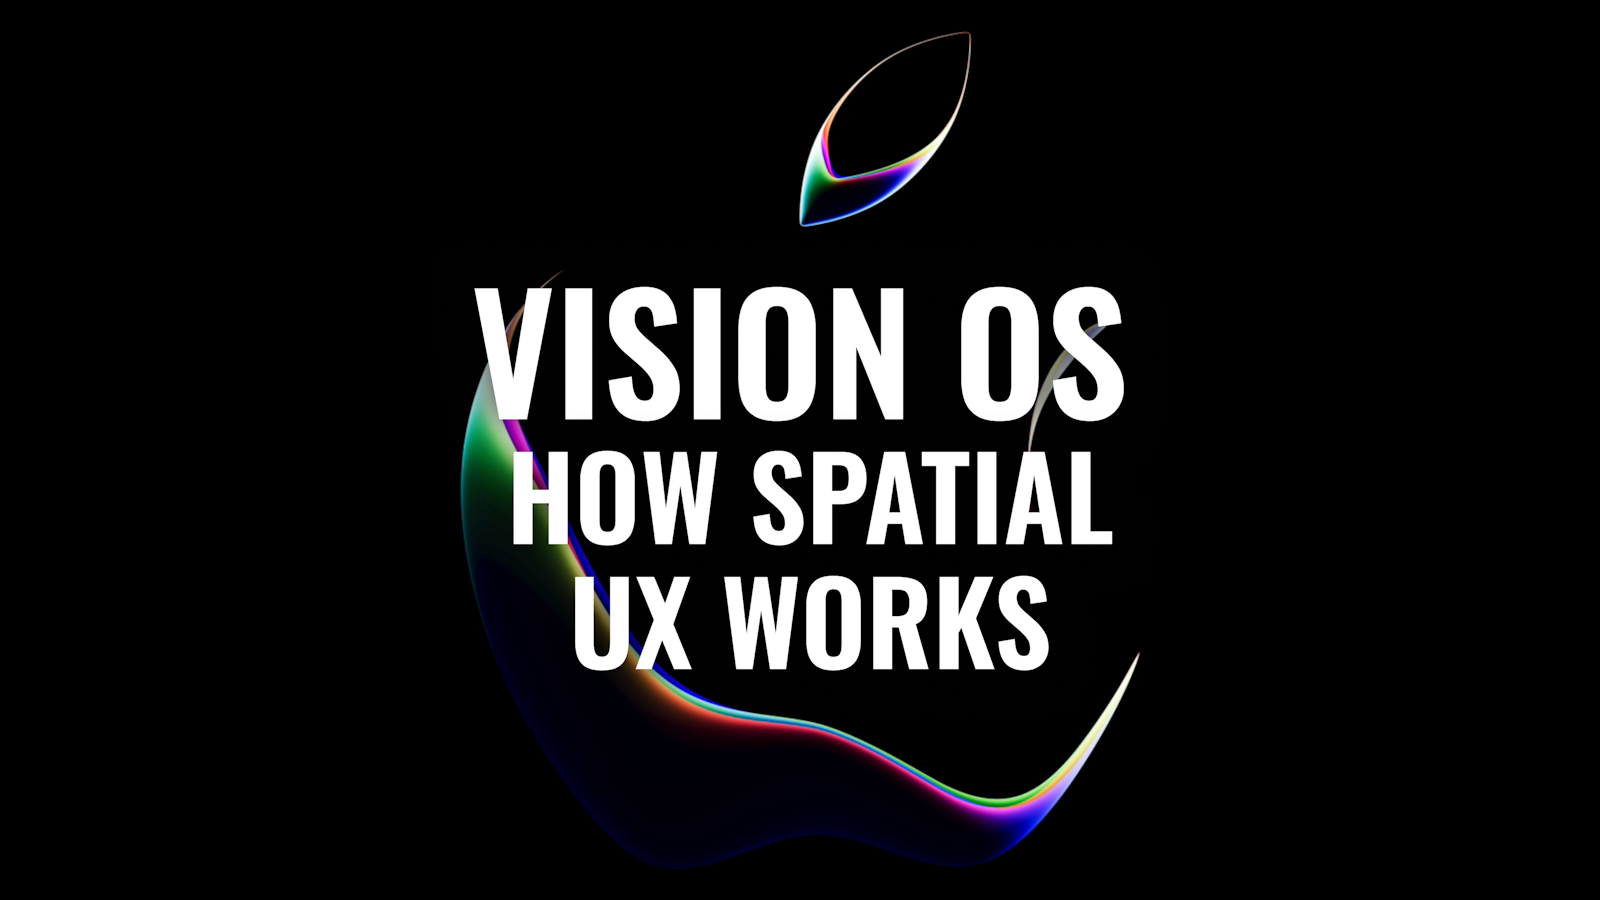 Spatial UX 101:  Getting Started with Vision OS